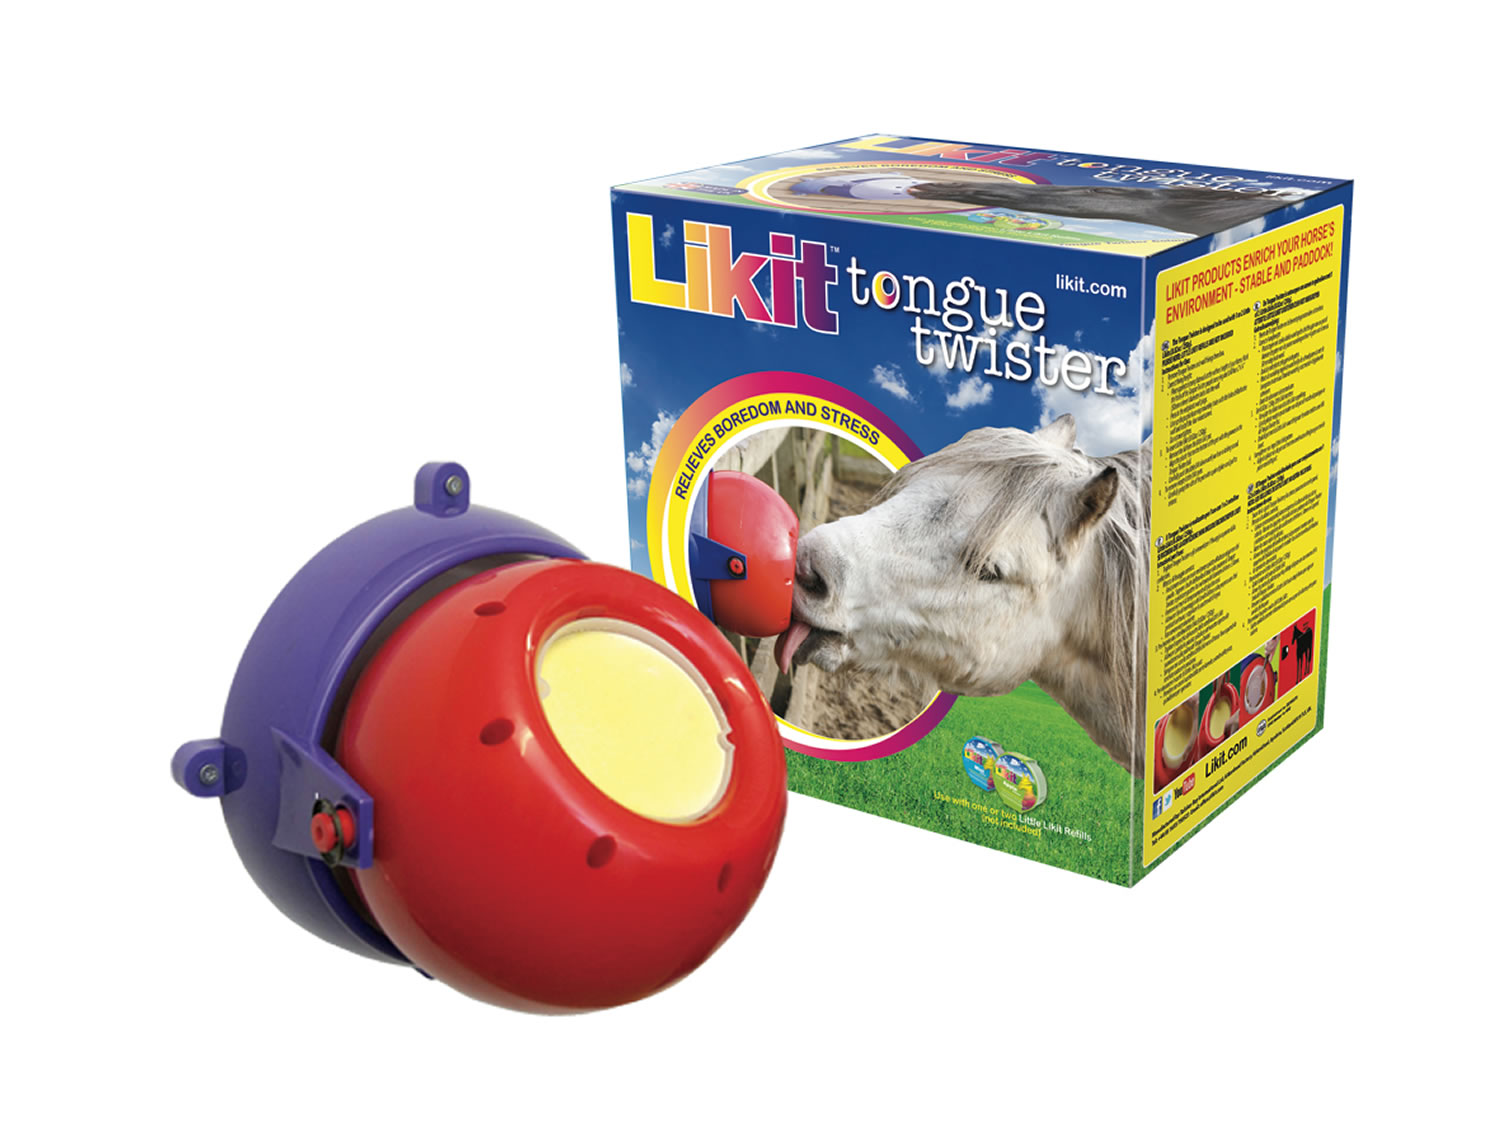 LIKIT TONGUE TWISTER RED